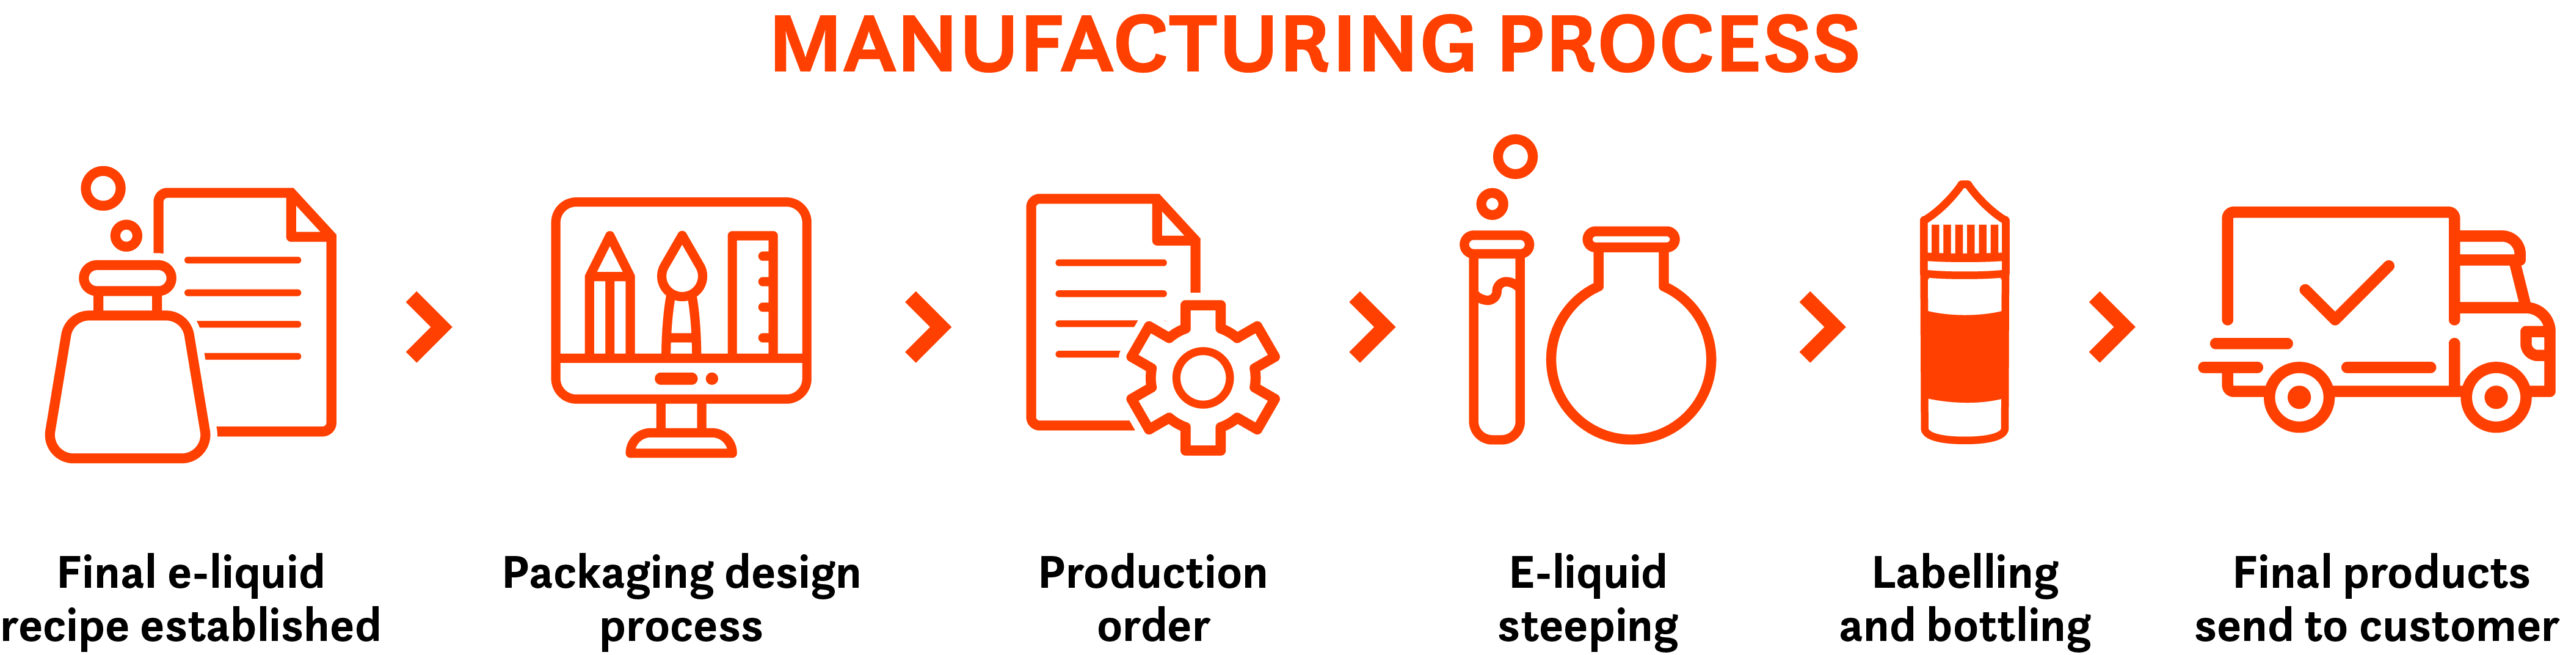 6 stages of the manufacturing process: final e-liquid recipe established, packaging design process, production order, e-liquid steeping, labelling and bottling, final products send to customers